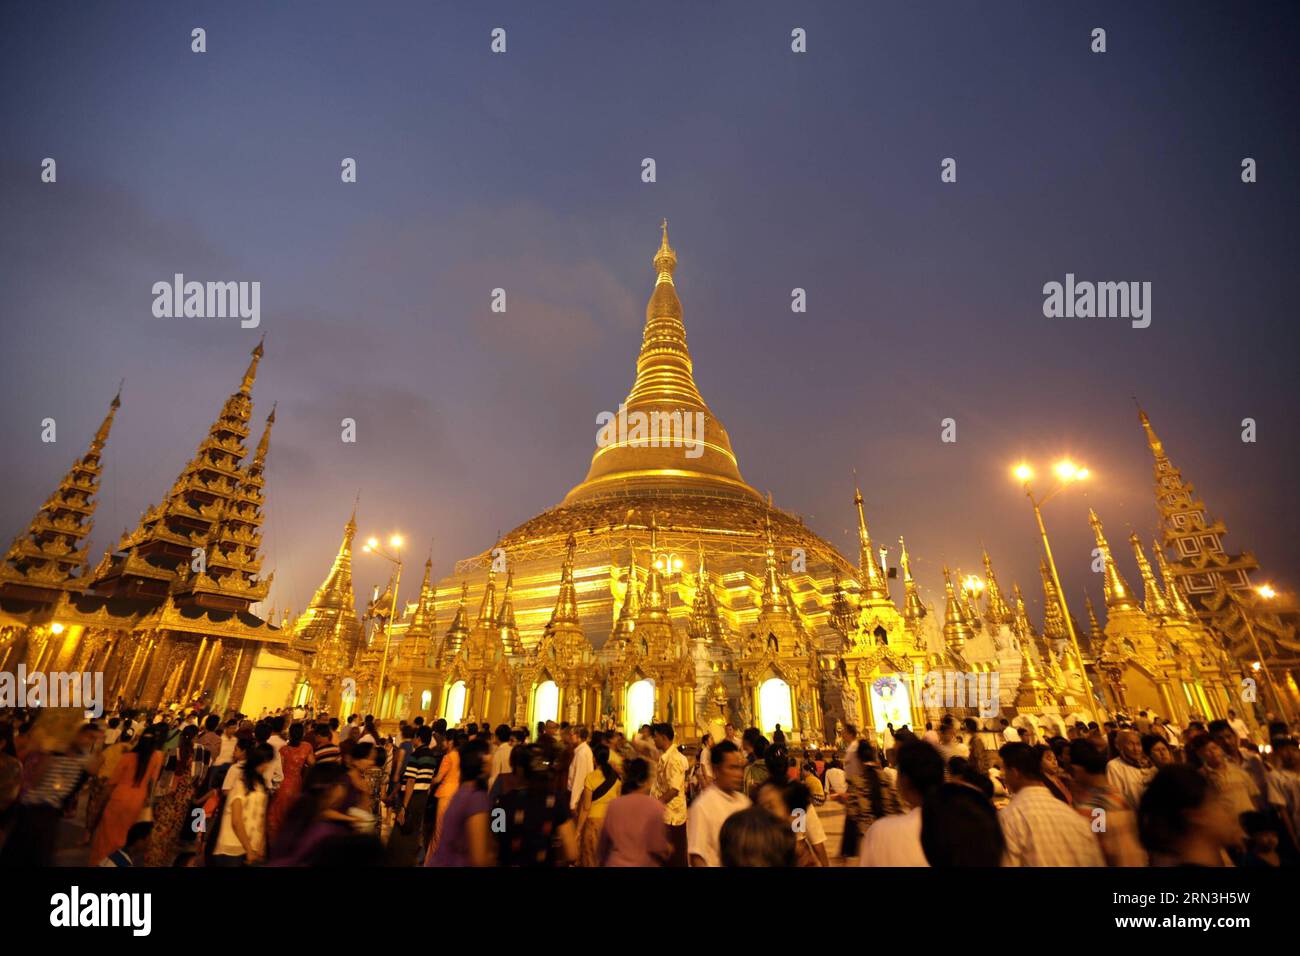 (150417) -- YANGON, April 17, 2015 -- People gather to pray on the first day of Myanmar s new year at the world-famous Shwedagon Pagoda in Yangon, Myanmar, April 17, 2015. On the first day of Myanmar s new year, people in the country used to perform meritorious deeds and Buddhists, who account for the majority of the people, usually go to the pagodas, monasteries and meditation centers where they practice meditation. ) MYANMAR-YANGON-NEW YEAR UxAung PUBLICATIONxNOTxINxCHN   Yangon April 17 2015 Celebrities gather to Pray ON The First Day of Myanmar S New Year AT The World Famous Shwedagon Pago Stock Photo